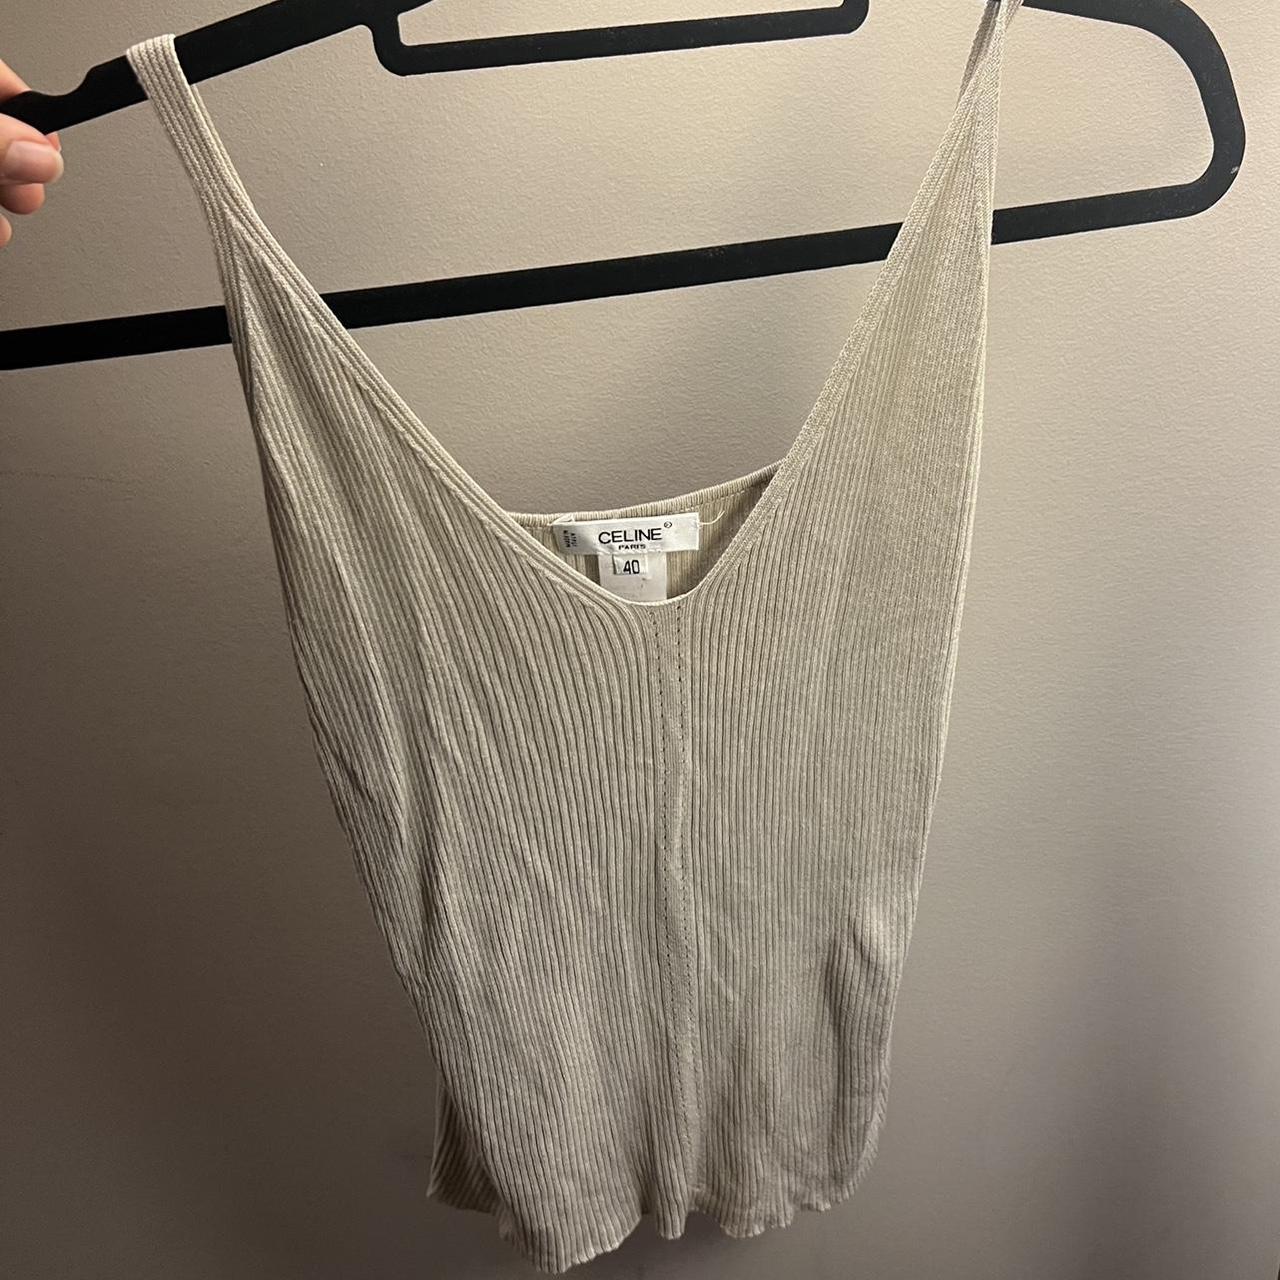 Celine Triomphe Crop top Like New with tags and - Depop